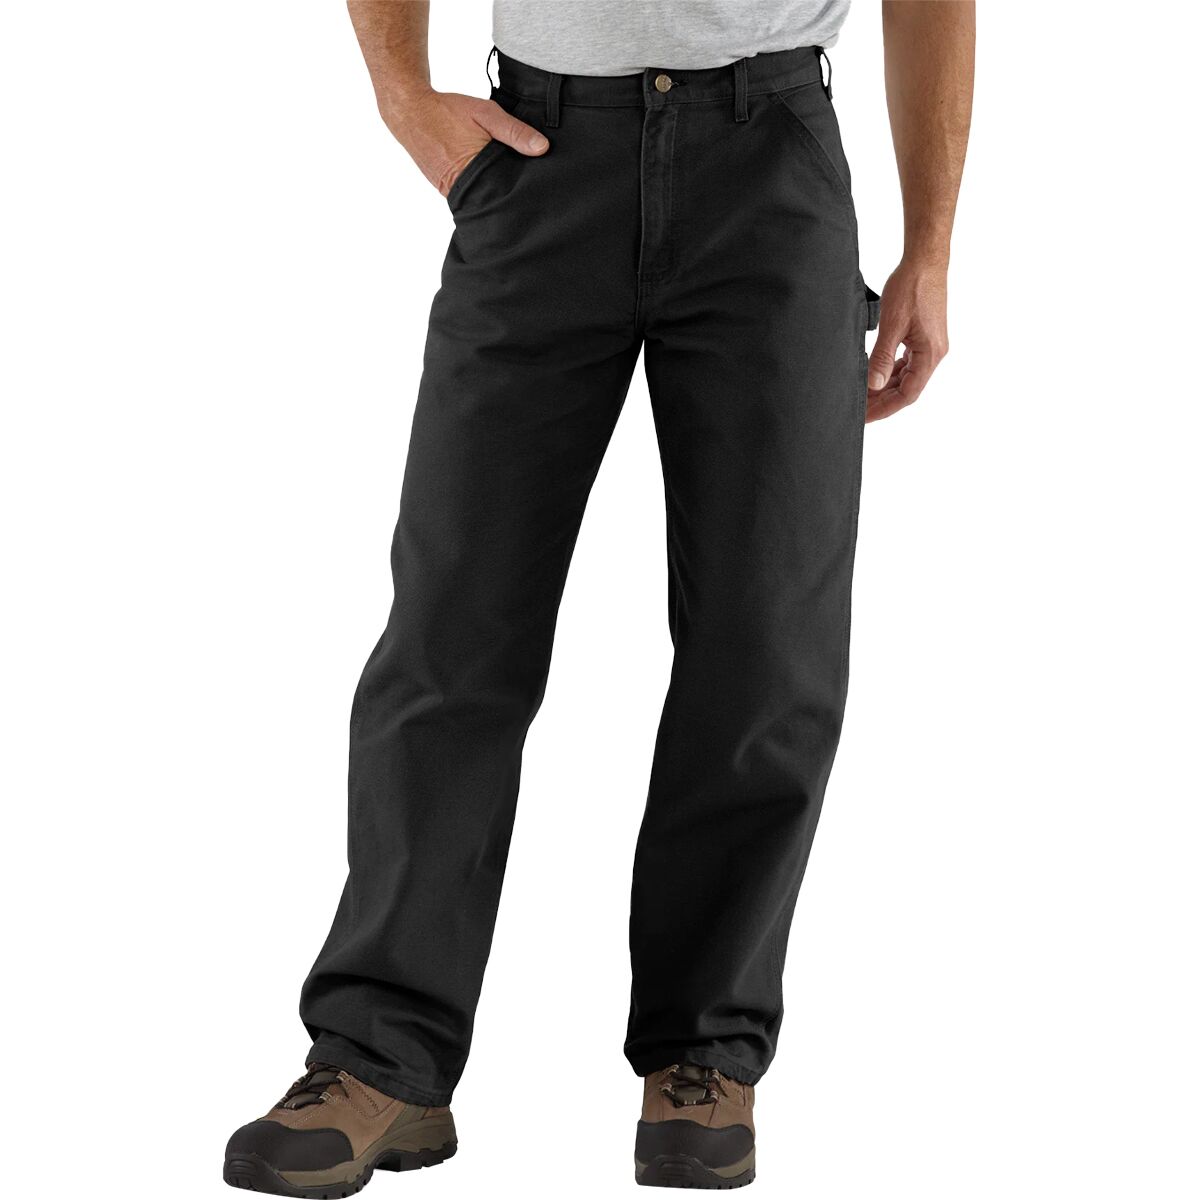 Carhartt Loose Fit Washed Duck Utility Work - Men's